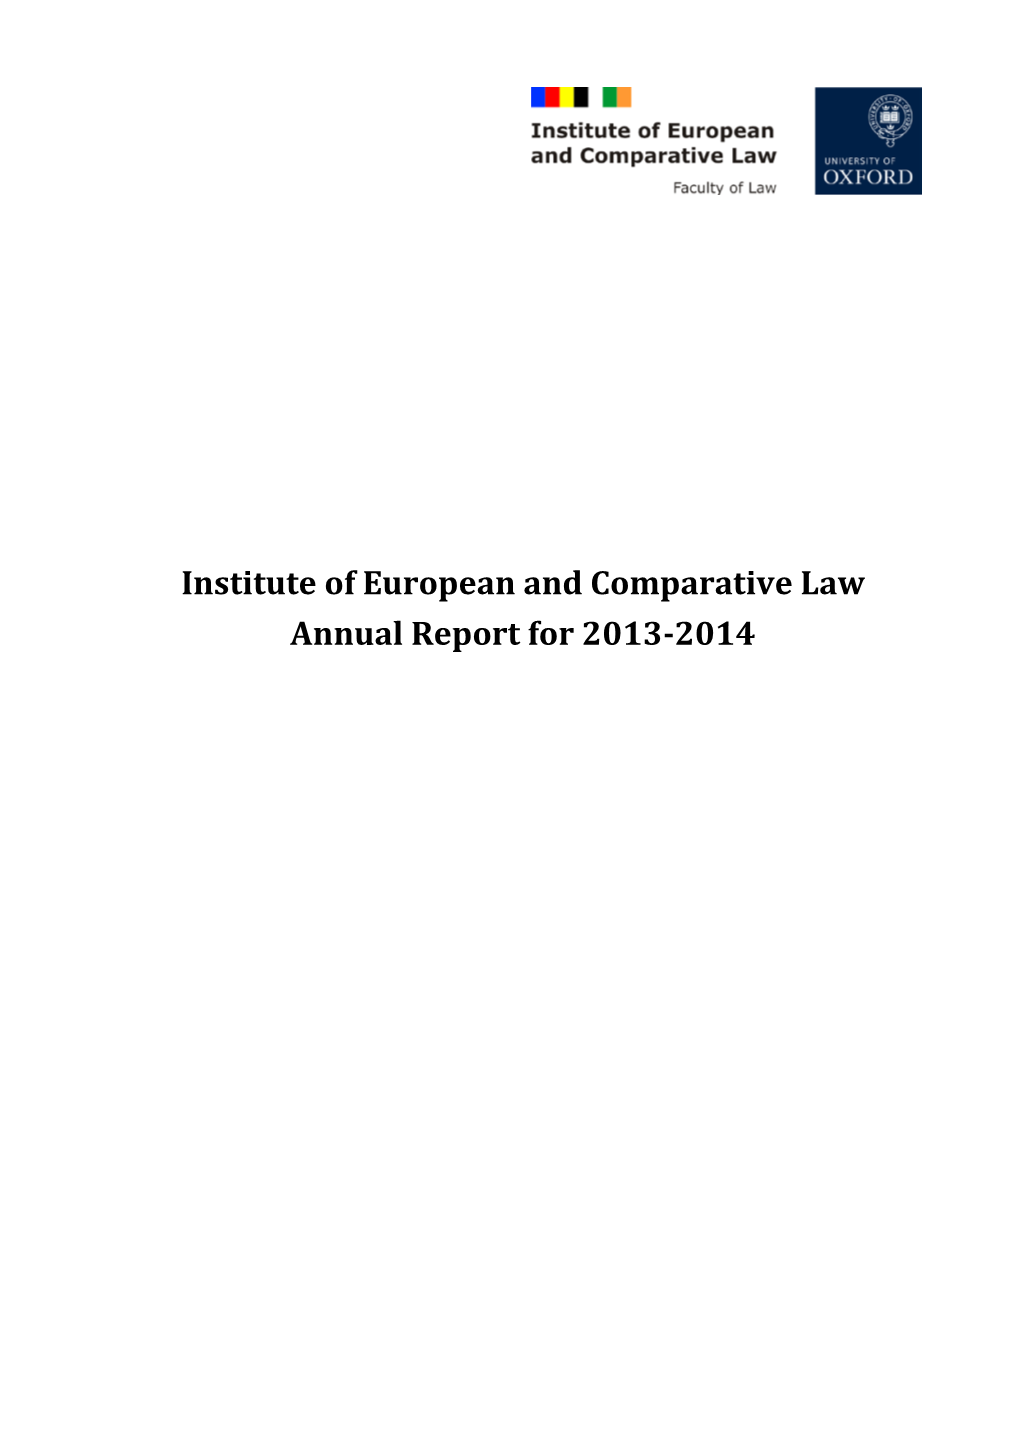 Institute of European and Comparative Law Annual Report for 2013-2014